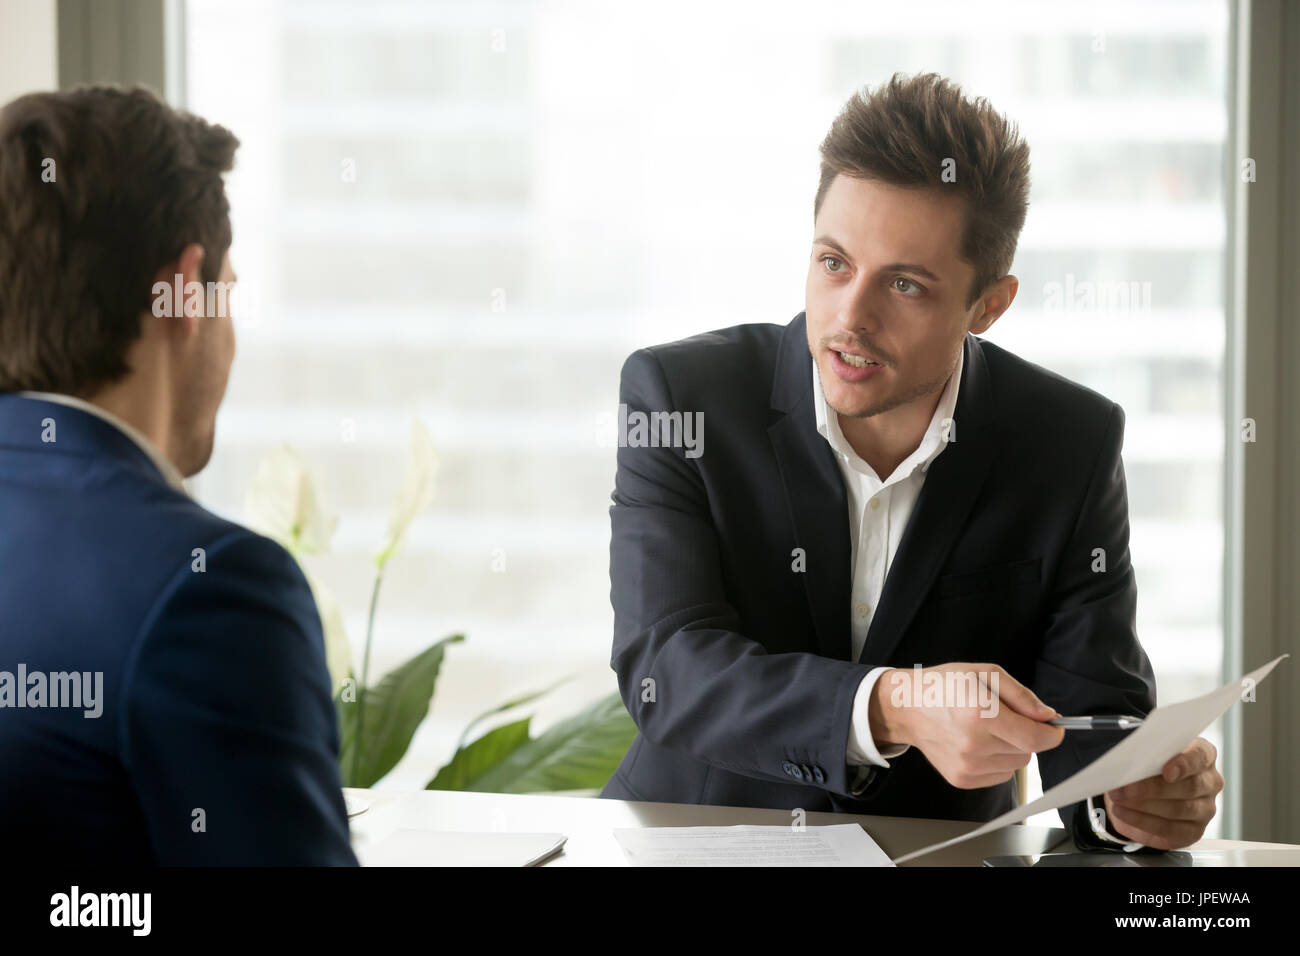 Financial adviser consulting businessman, discussing contractual Stock Photo